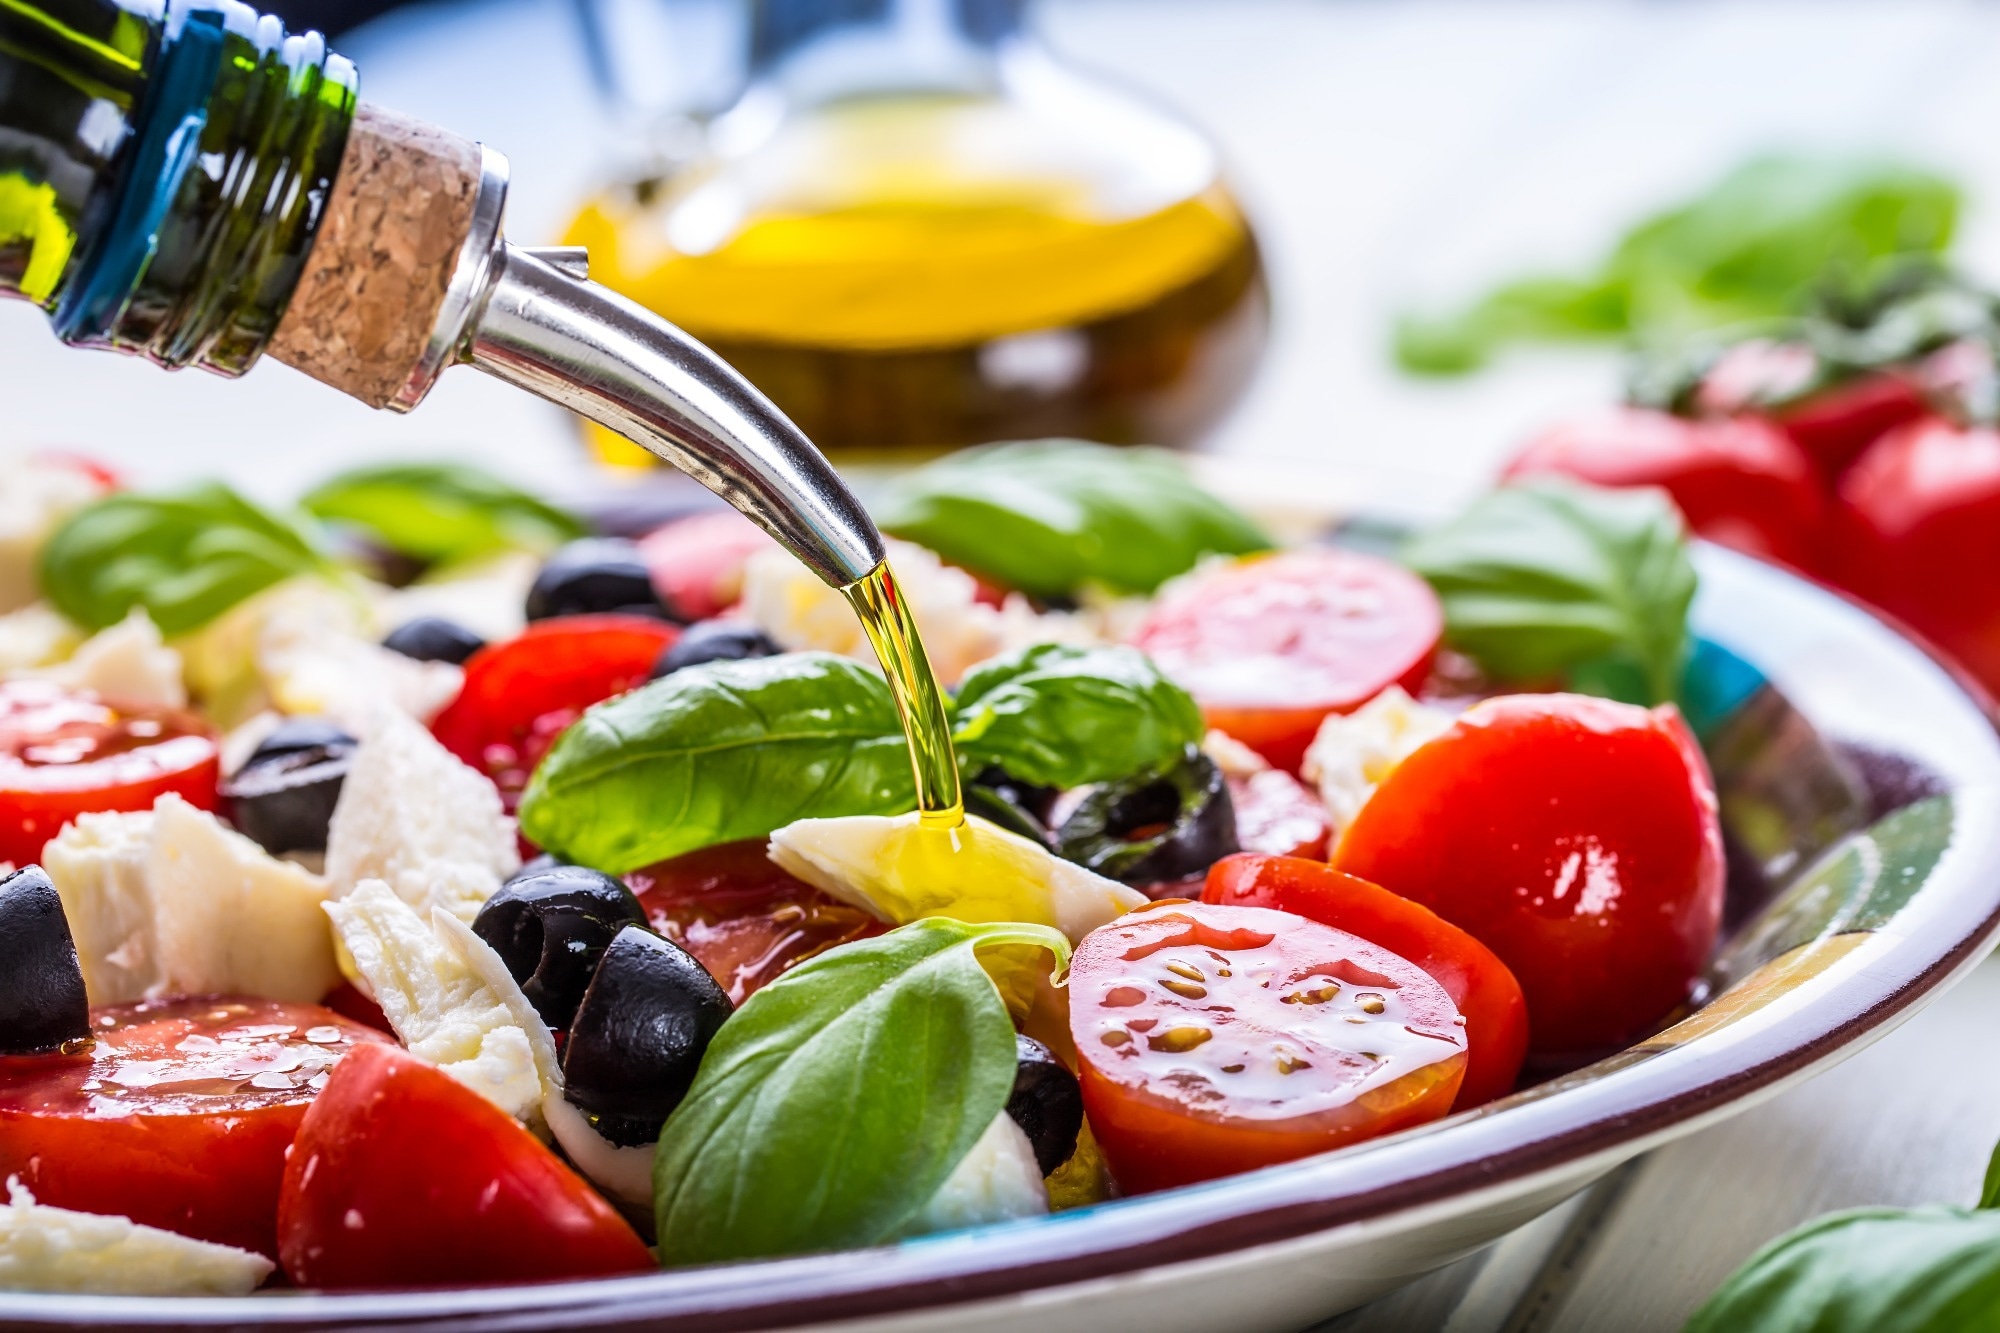 Study: Association of a Mediterranean Diet Pattern With Adverse Pregnancy Outcomes Among US Women. Image Credit: Marian Weyo/Shutterstock